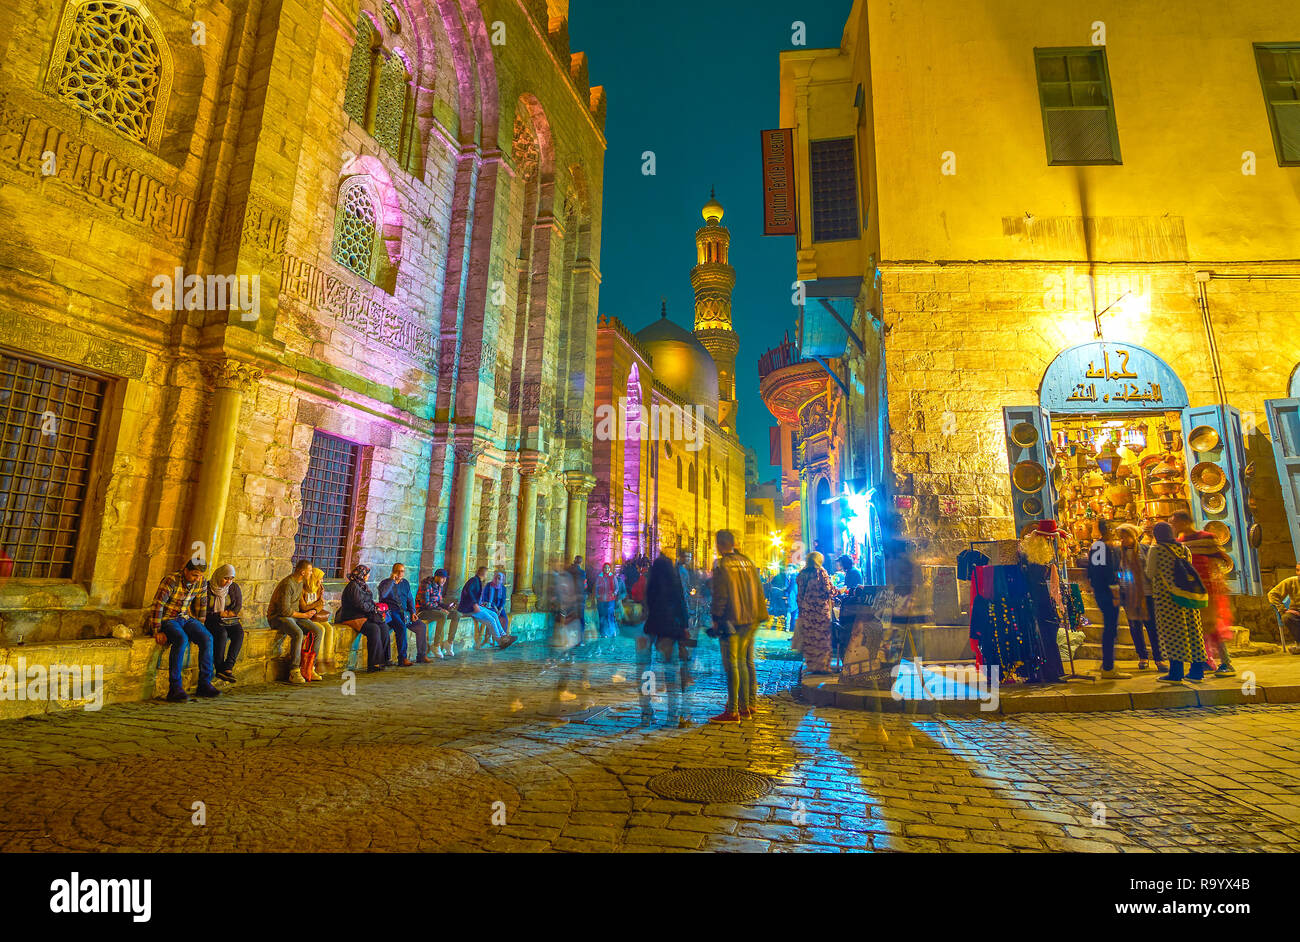 CAIRO, EGYPT - DECEMBER 20, 2017: The beautiful illuminated historical edifices in Al-muizz street  attract people to spend a time here and enjoy magn Stock Photo